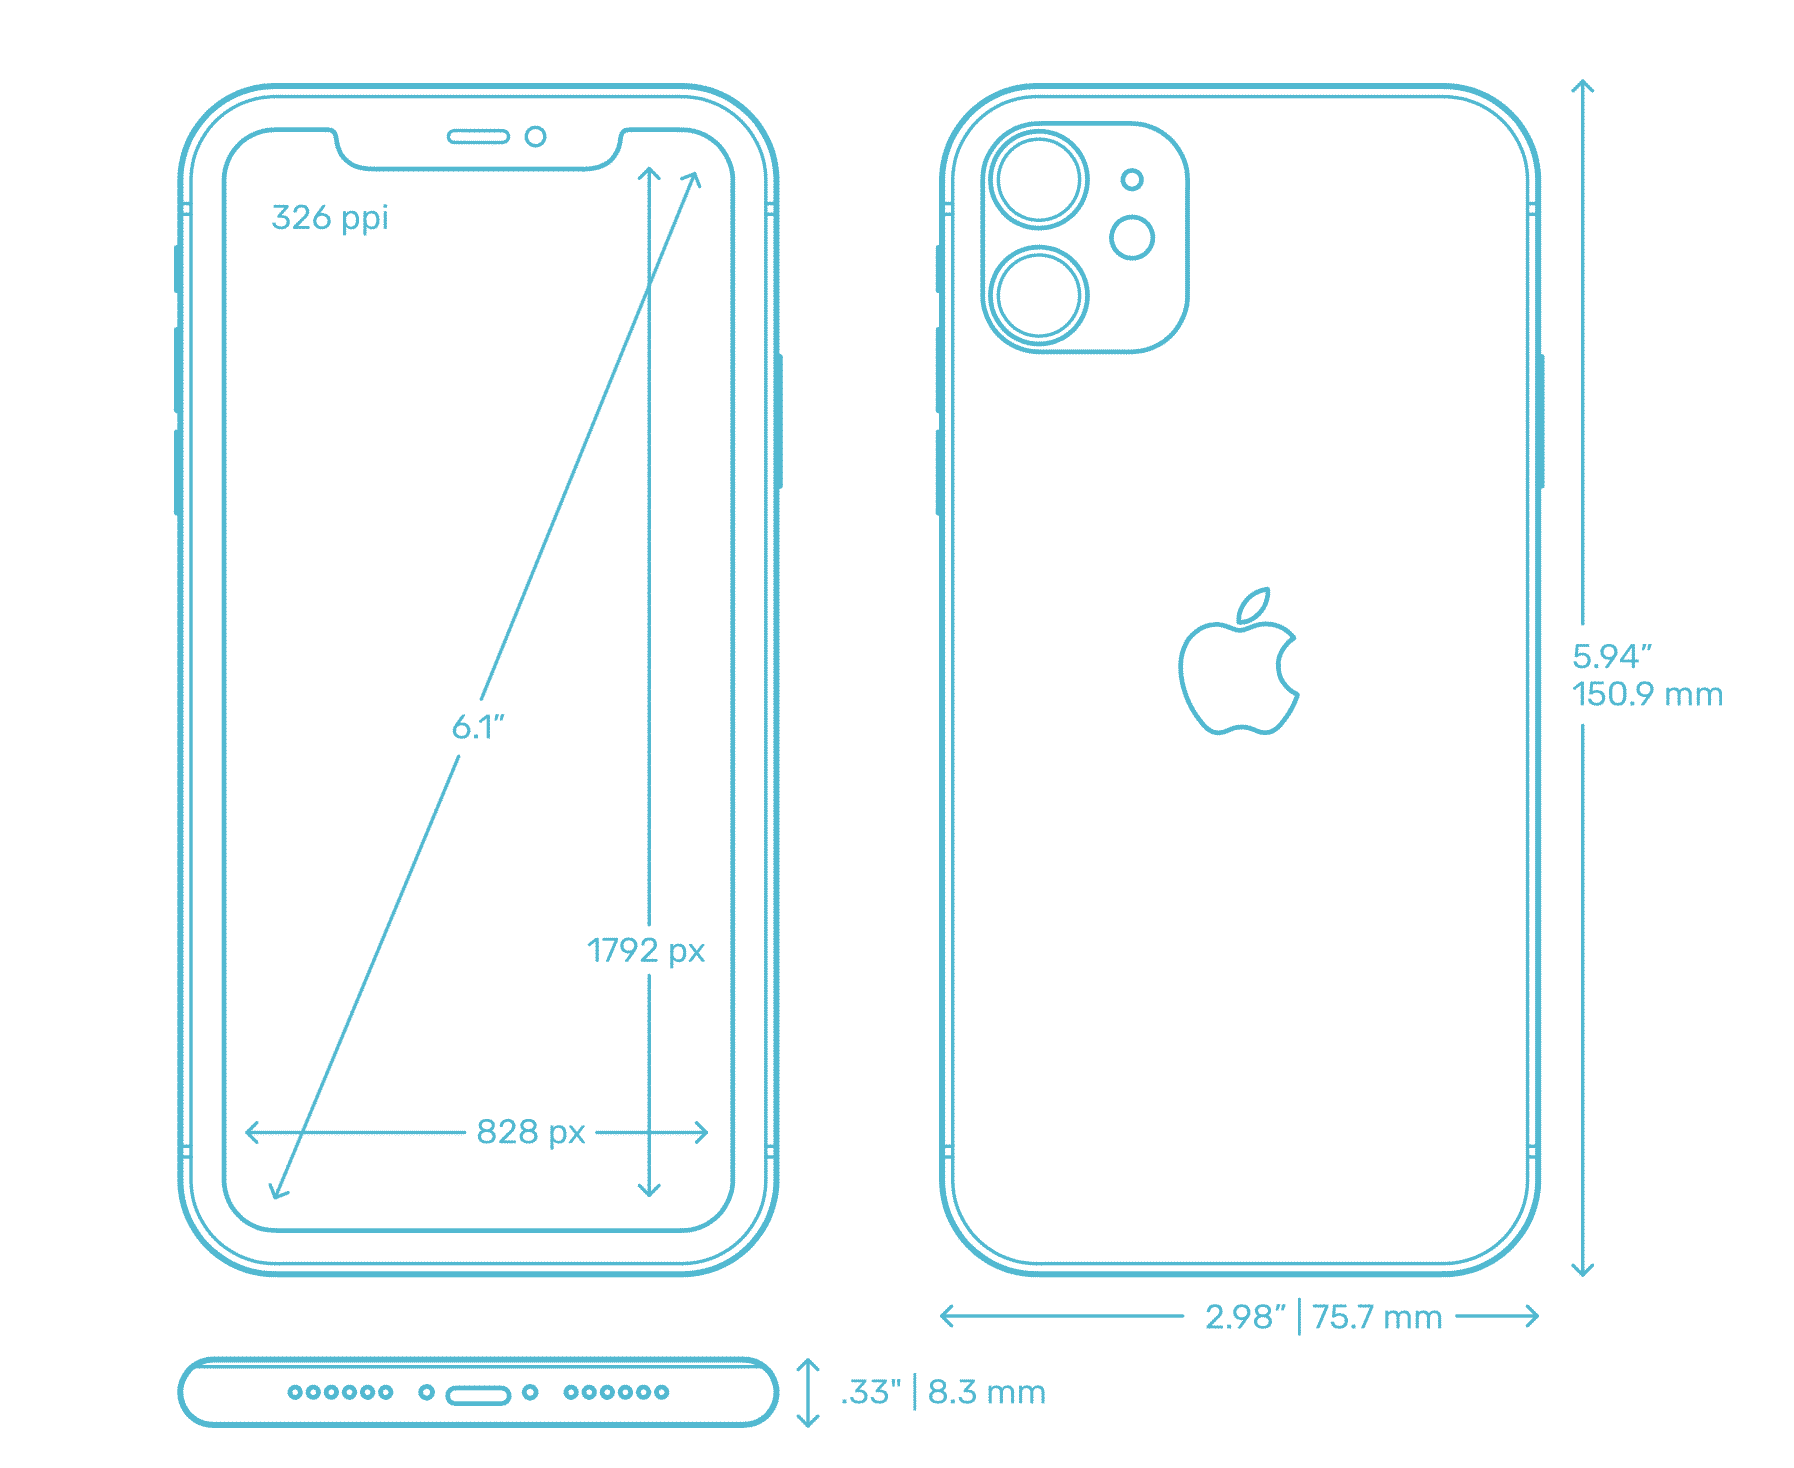 How to Create Your Own Custom 3D Printed Case For Your iPhone 11 - FacFox